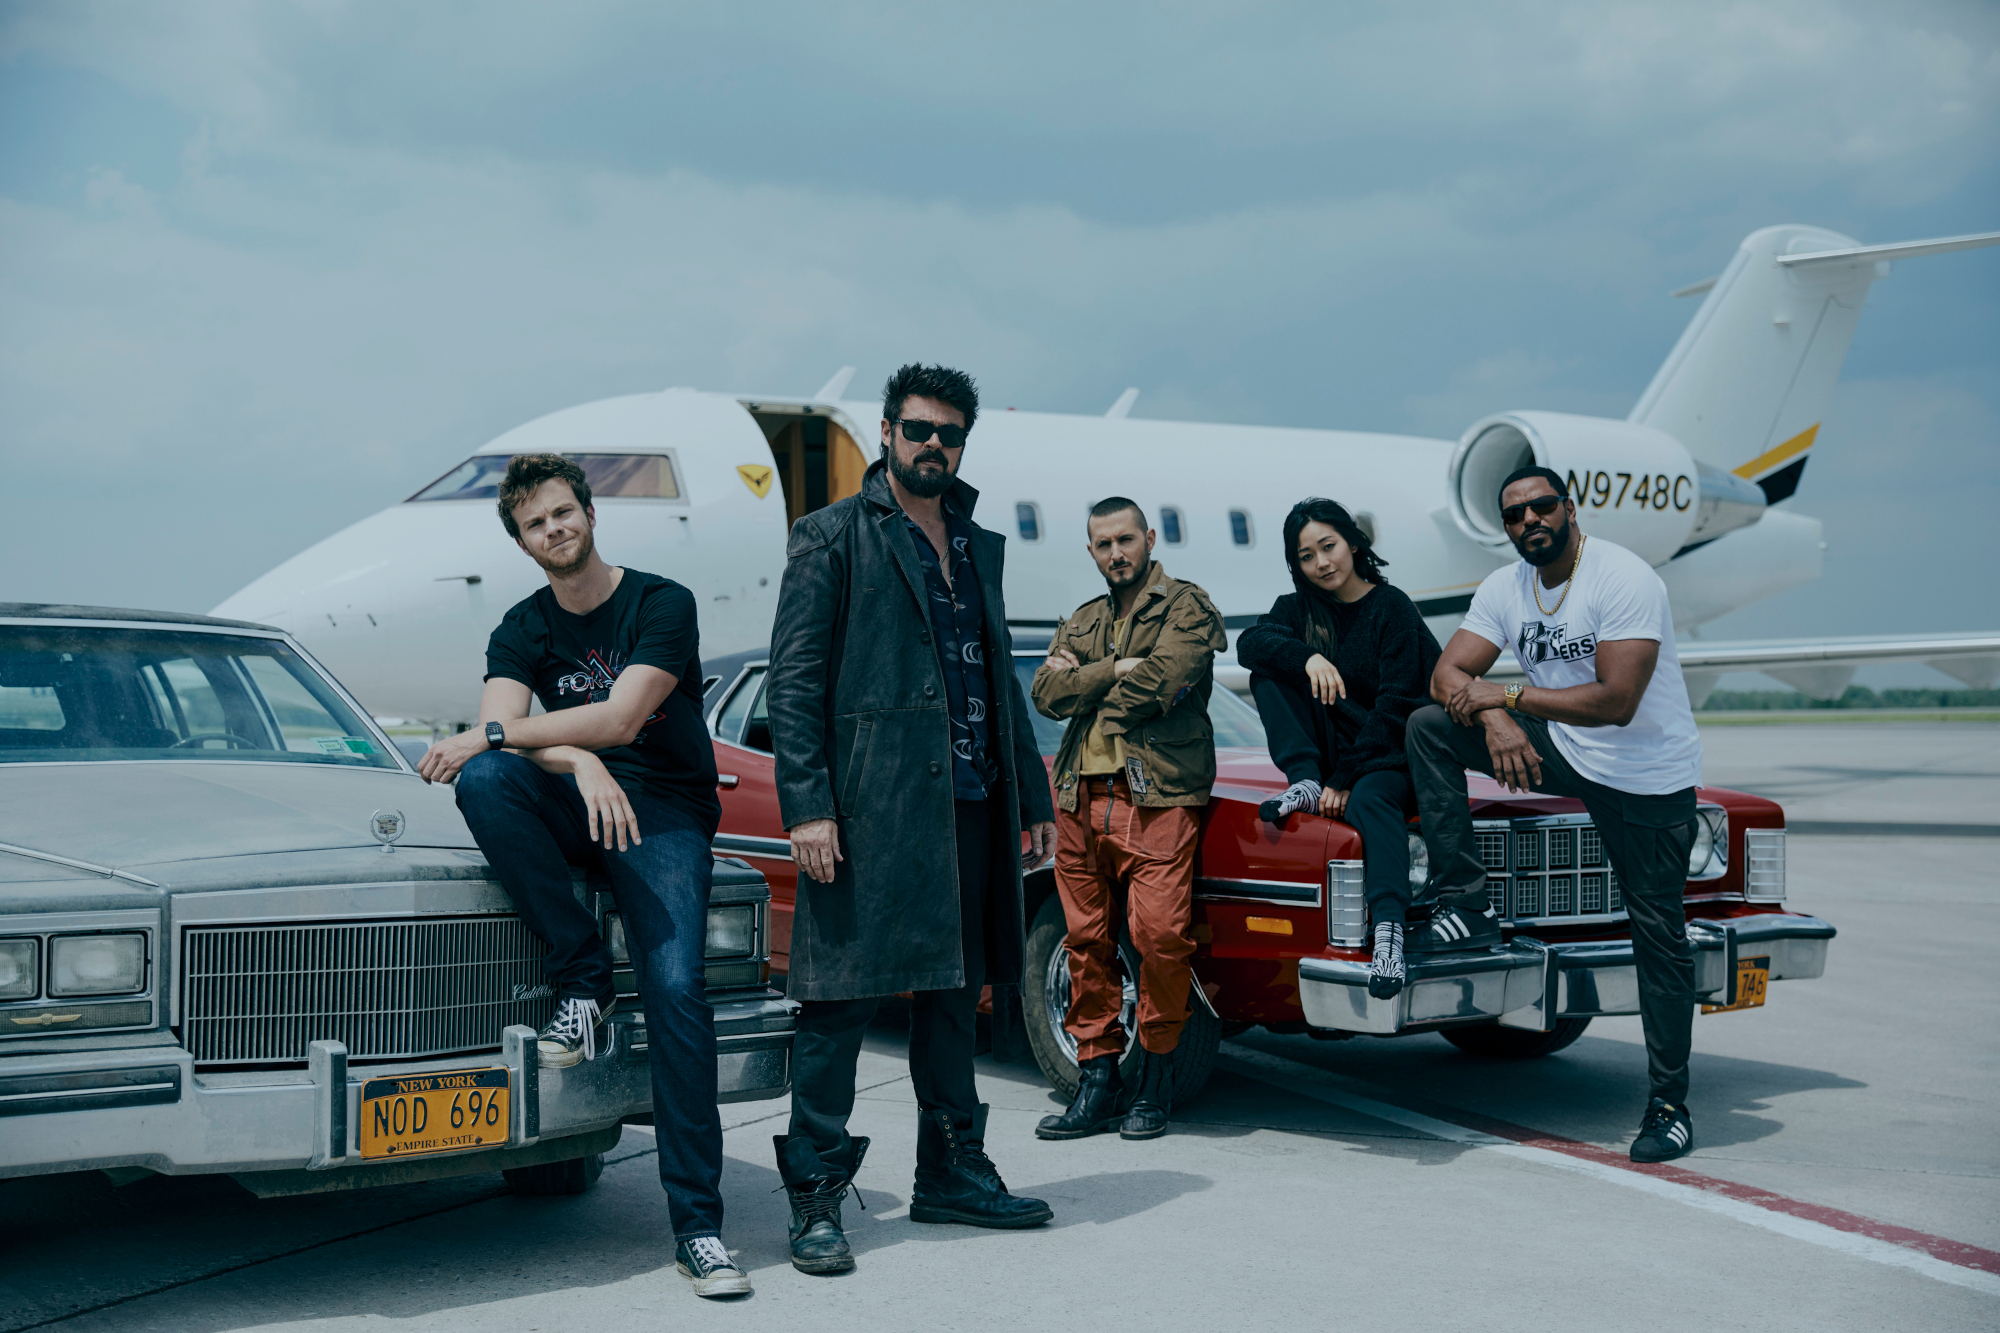 Jack Quaid (Hughie Campbell), Karl Urban (Billy Butcher), Tomer Capone (Frenchie), Karen Fukuhara (Kimiko), Laz Alonso (Mother's Milk) standing in front of an airplane in an image for 'The Boys,' which was renewed for season 4.